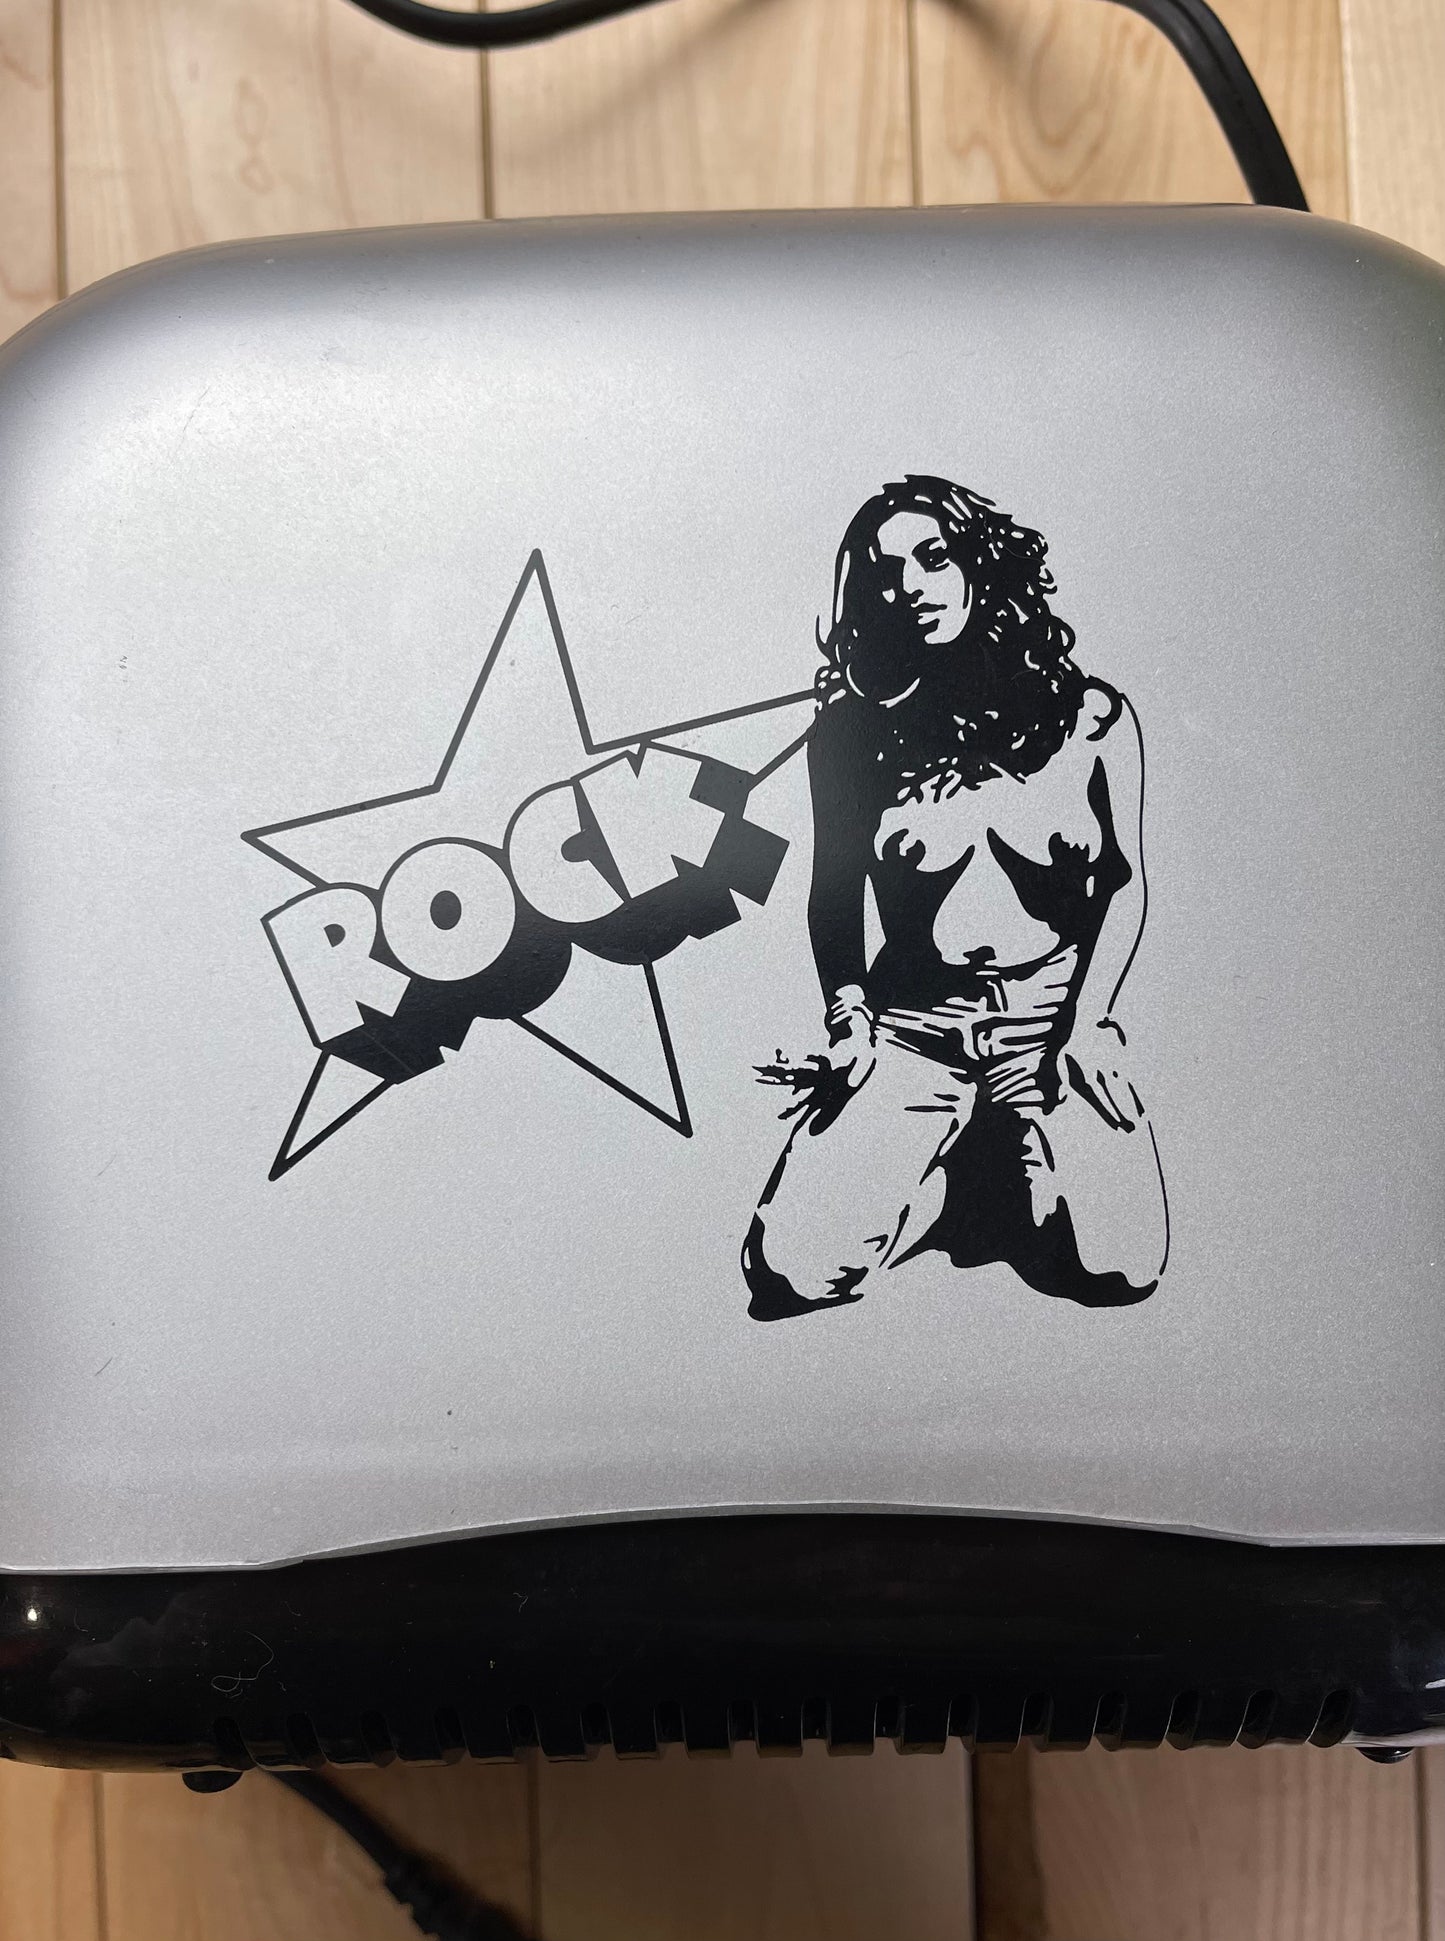 Hysteric Glamour Silver Rock Logo Toaster